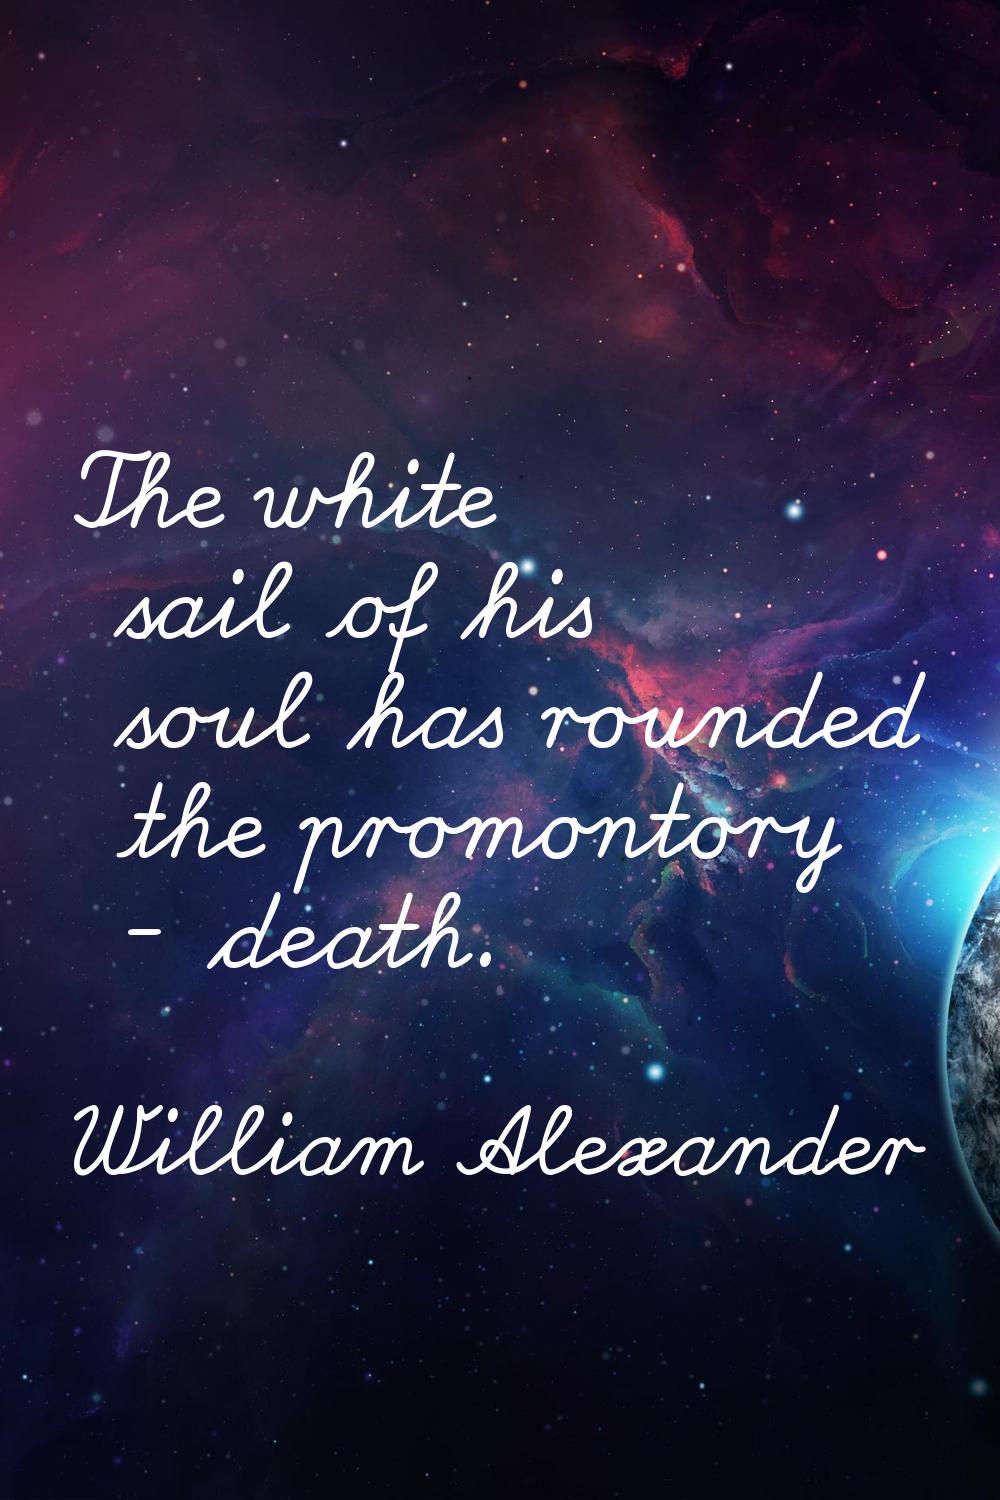 The white sail of his soul has rounded the promontory - death.